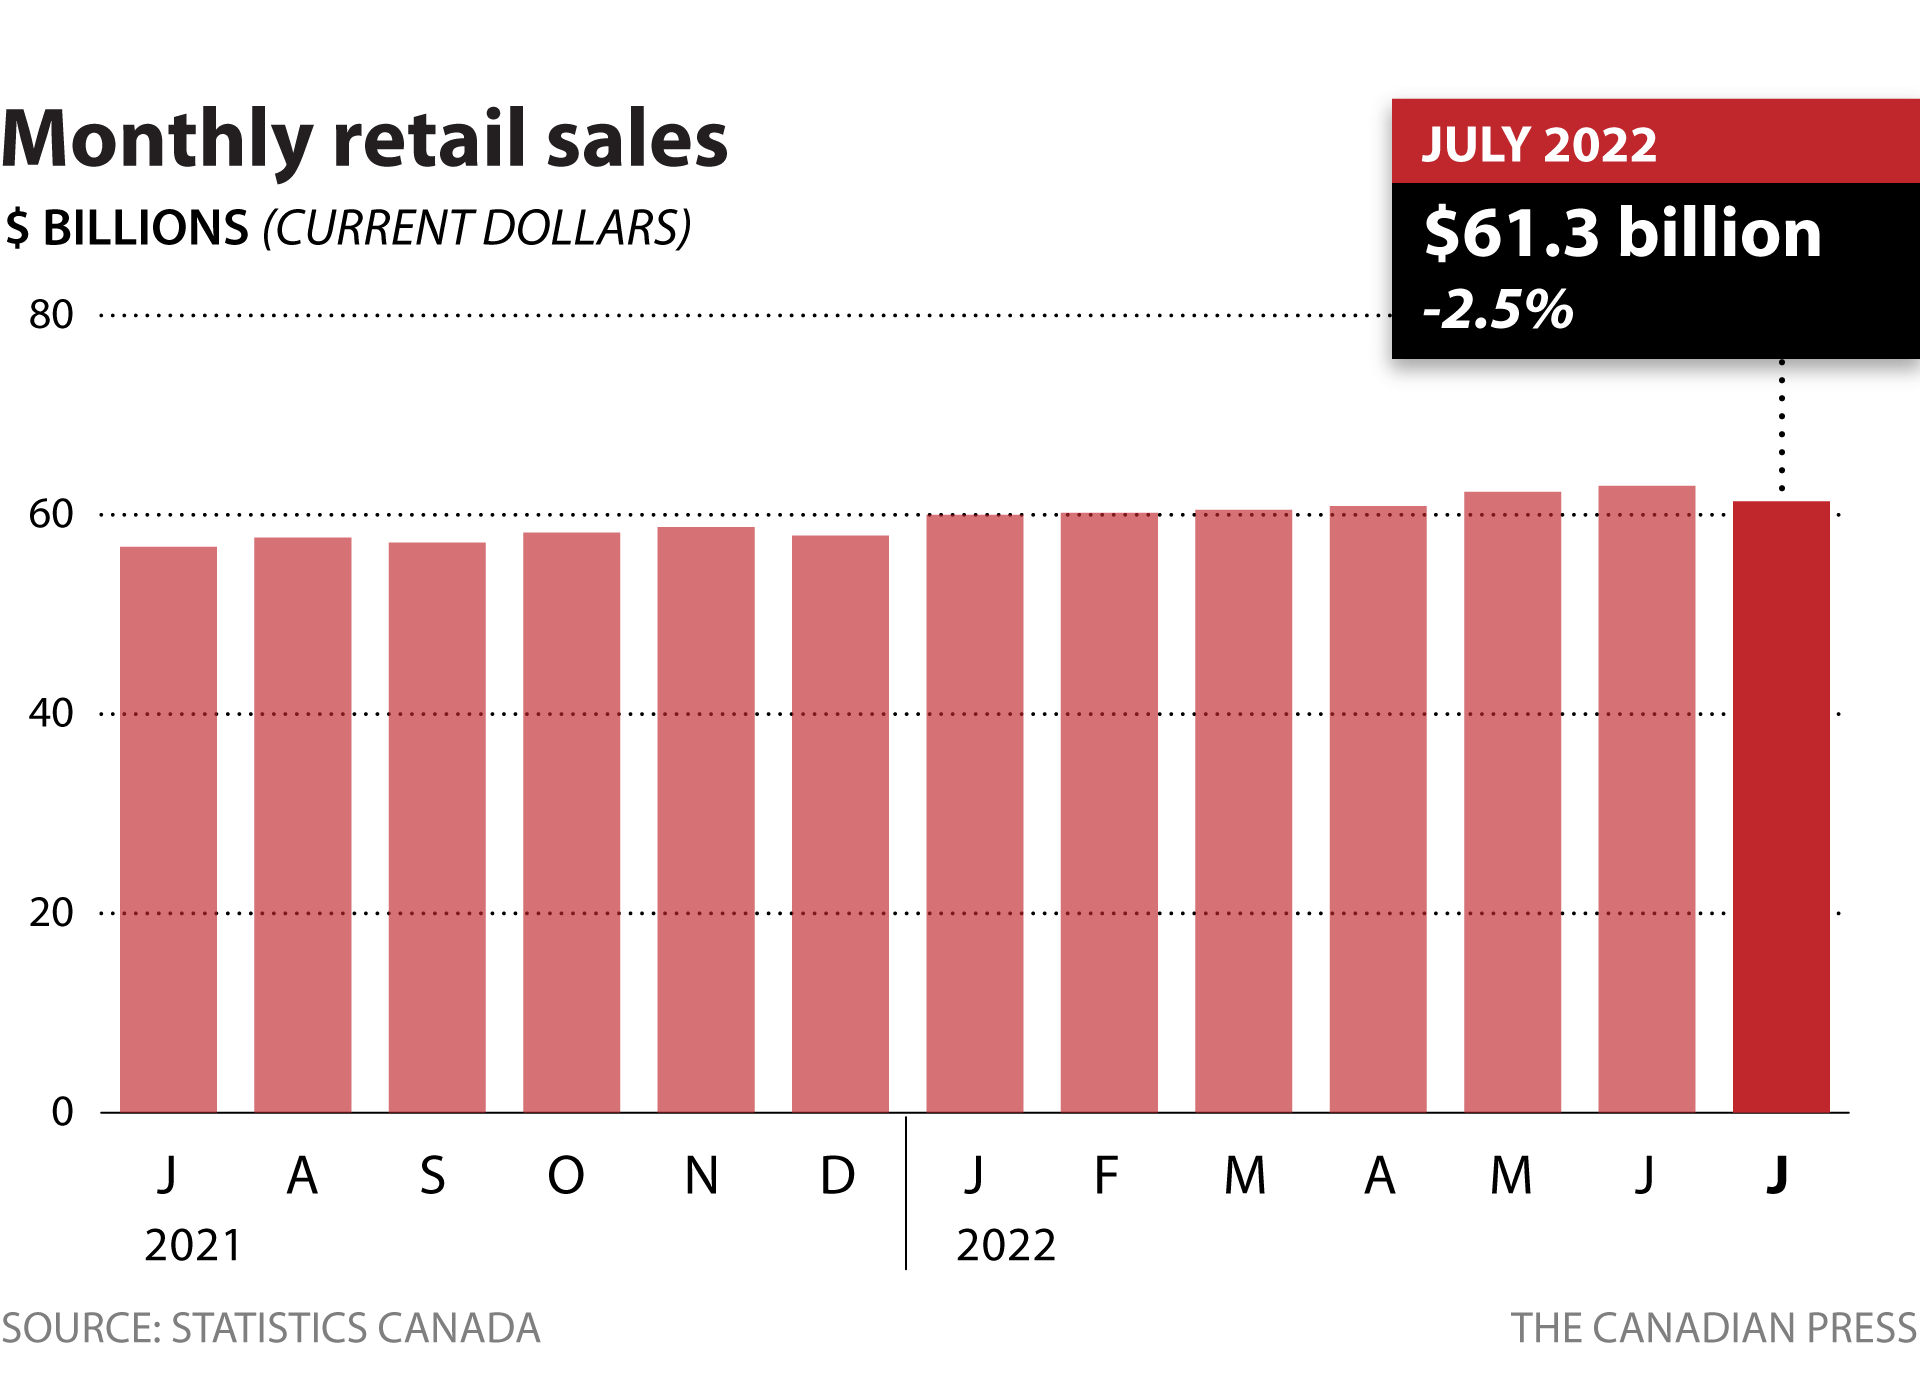 Statistics Canada says retail sales fell 2.5 to 61.3 billion in July